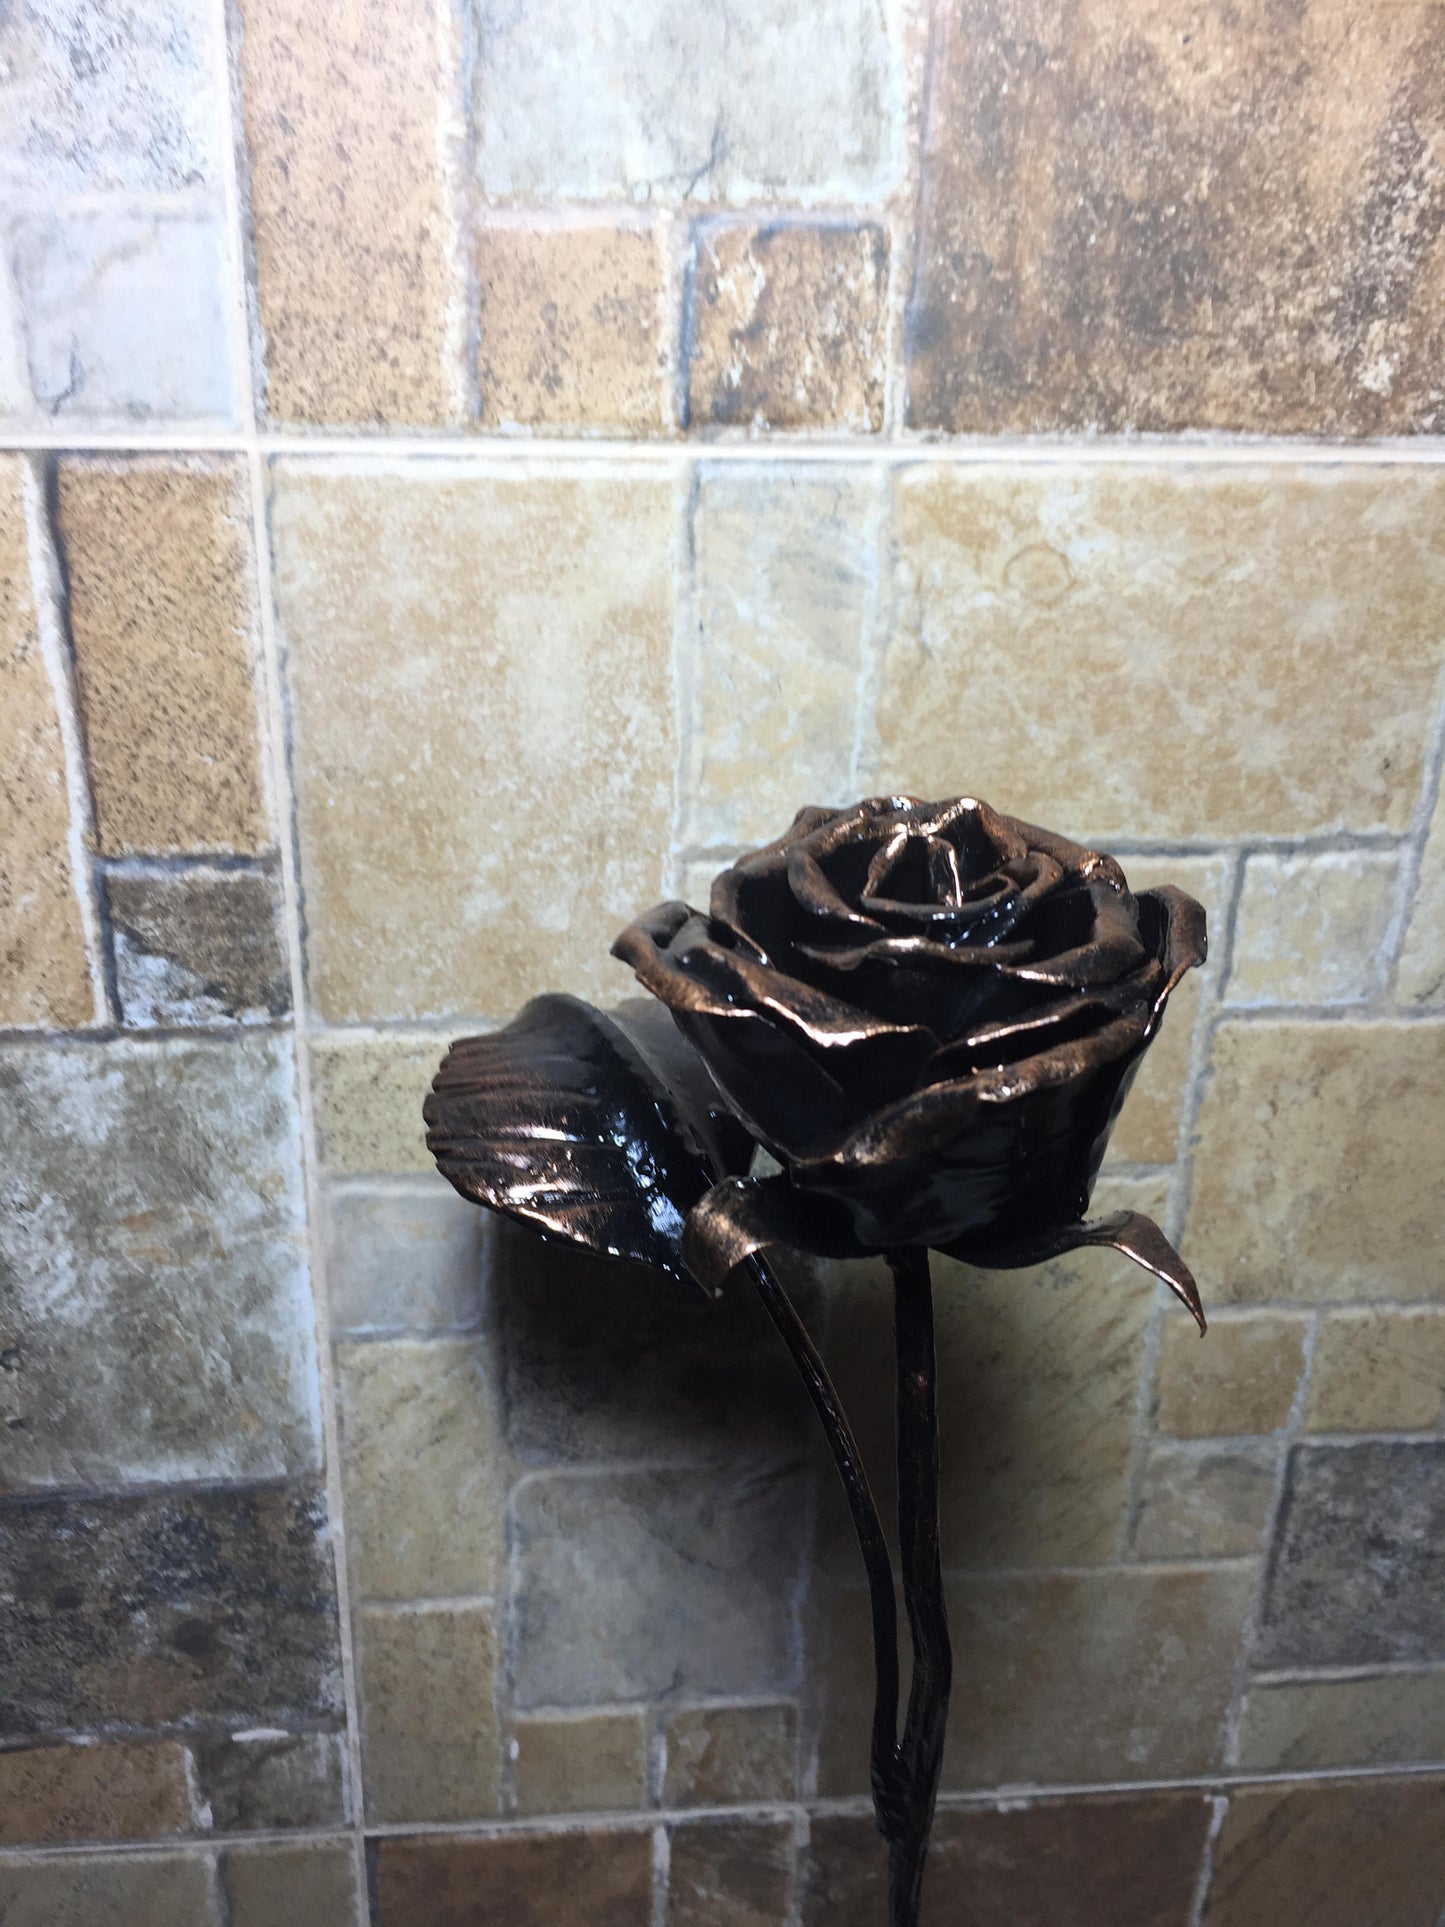 Wrought iron rose, anniversary gift for her, iron anniversary gift for her, steel anniversary gift, wedding anniversary gift, metal rose